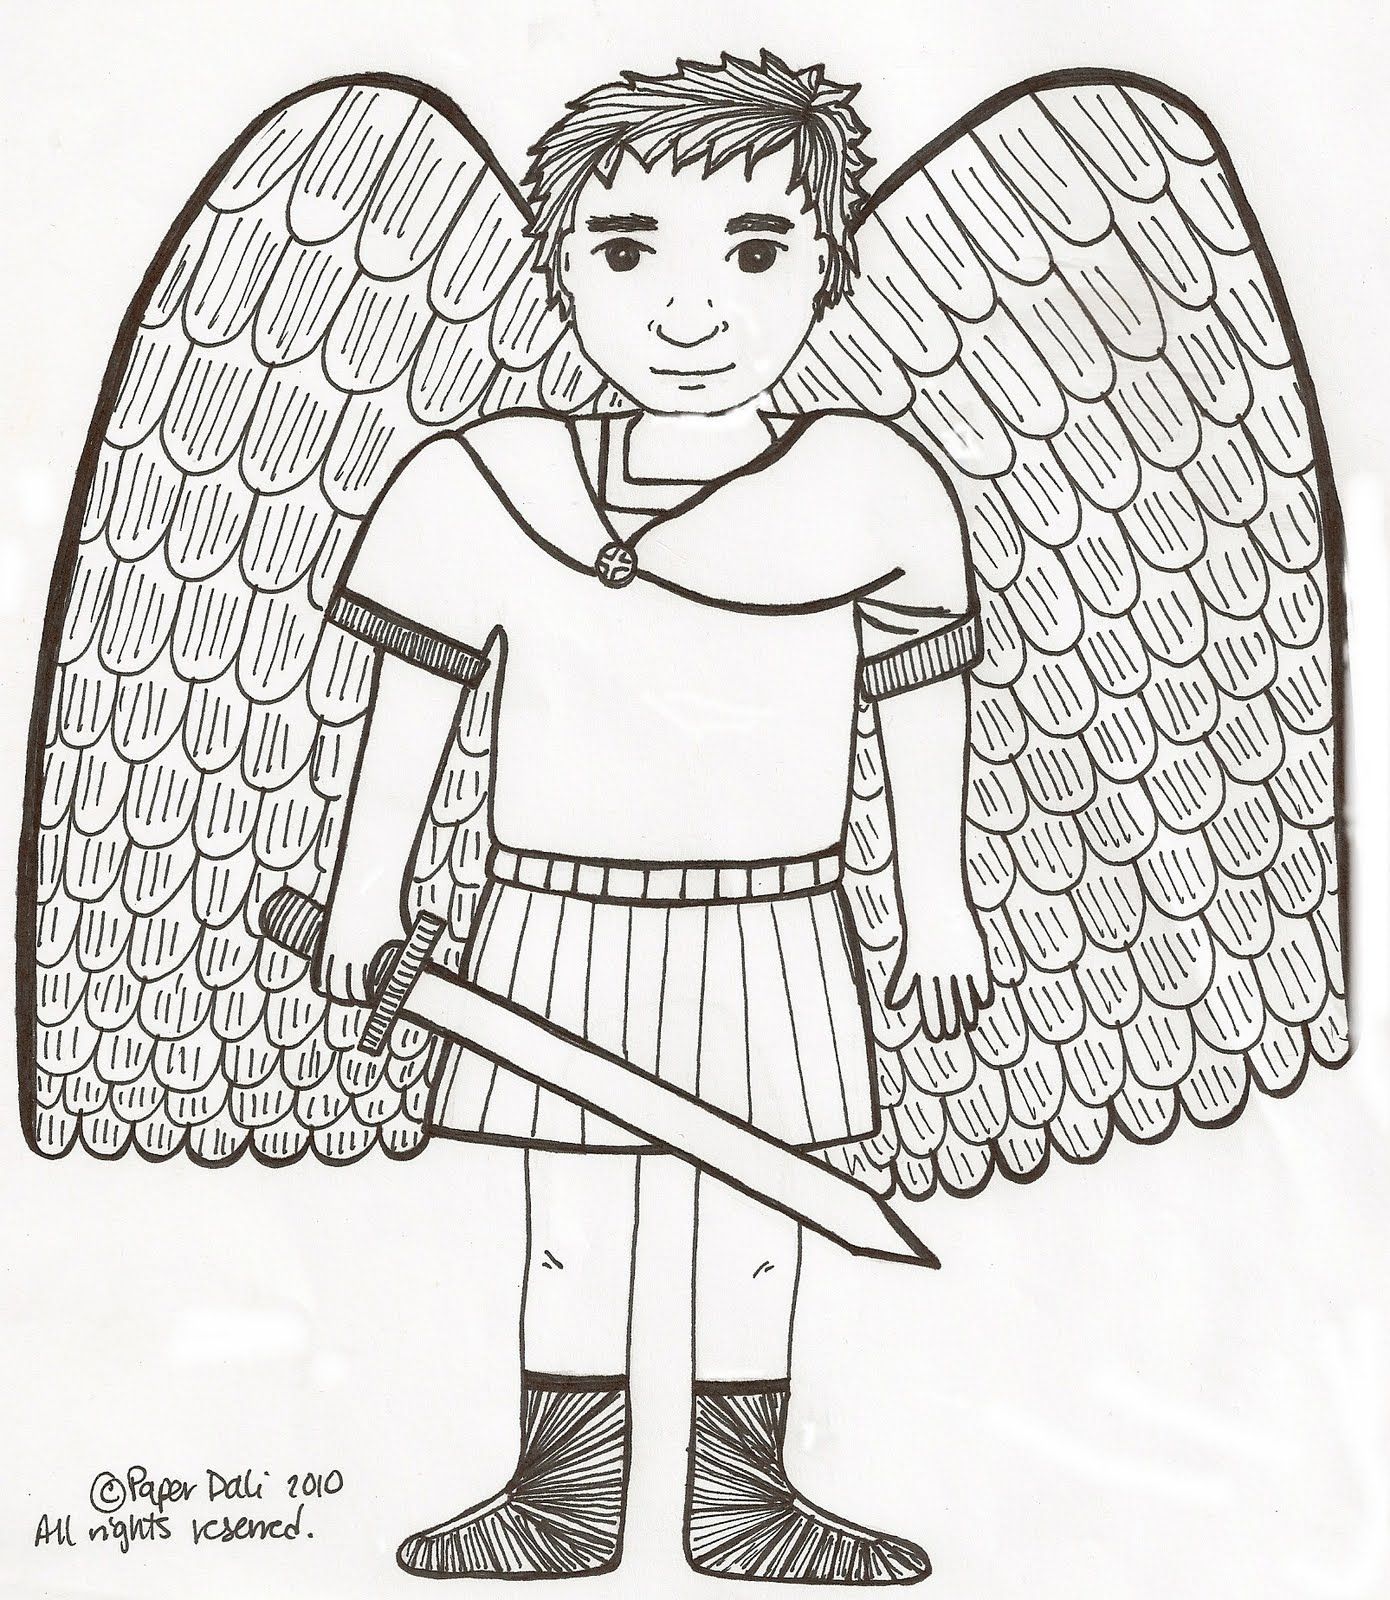 Catholic Coloring Pages | Coloring pages wallpaper